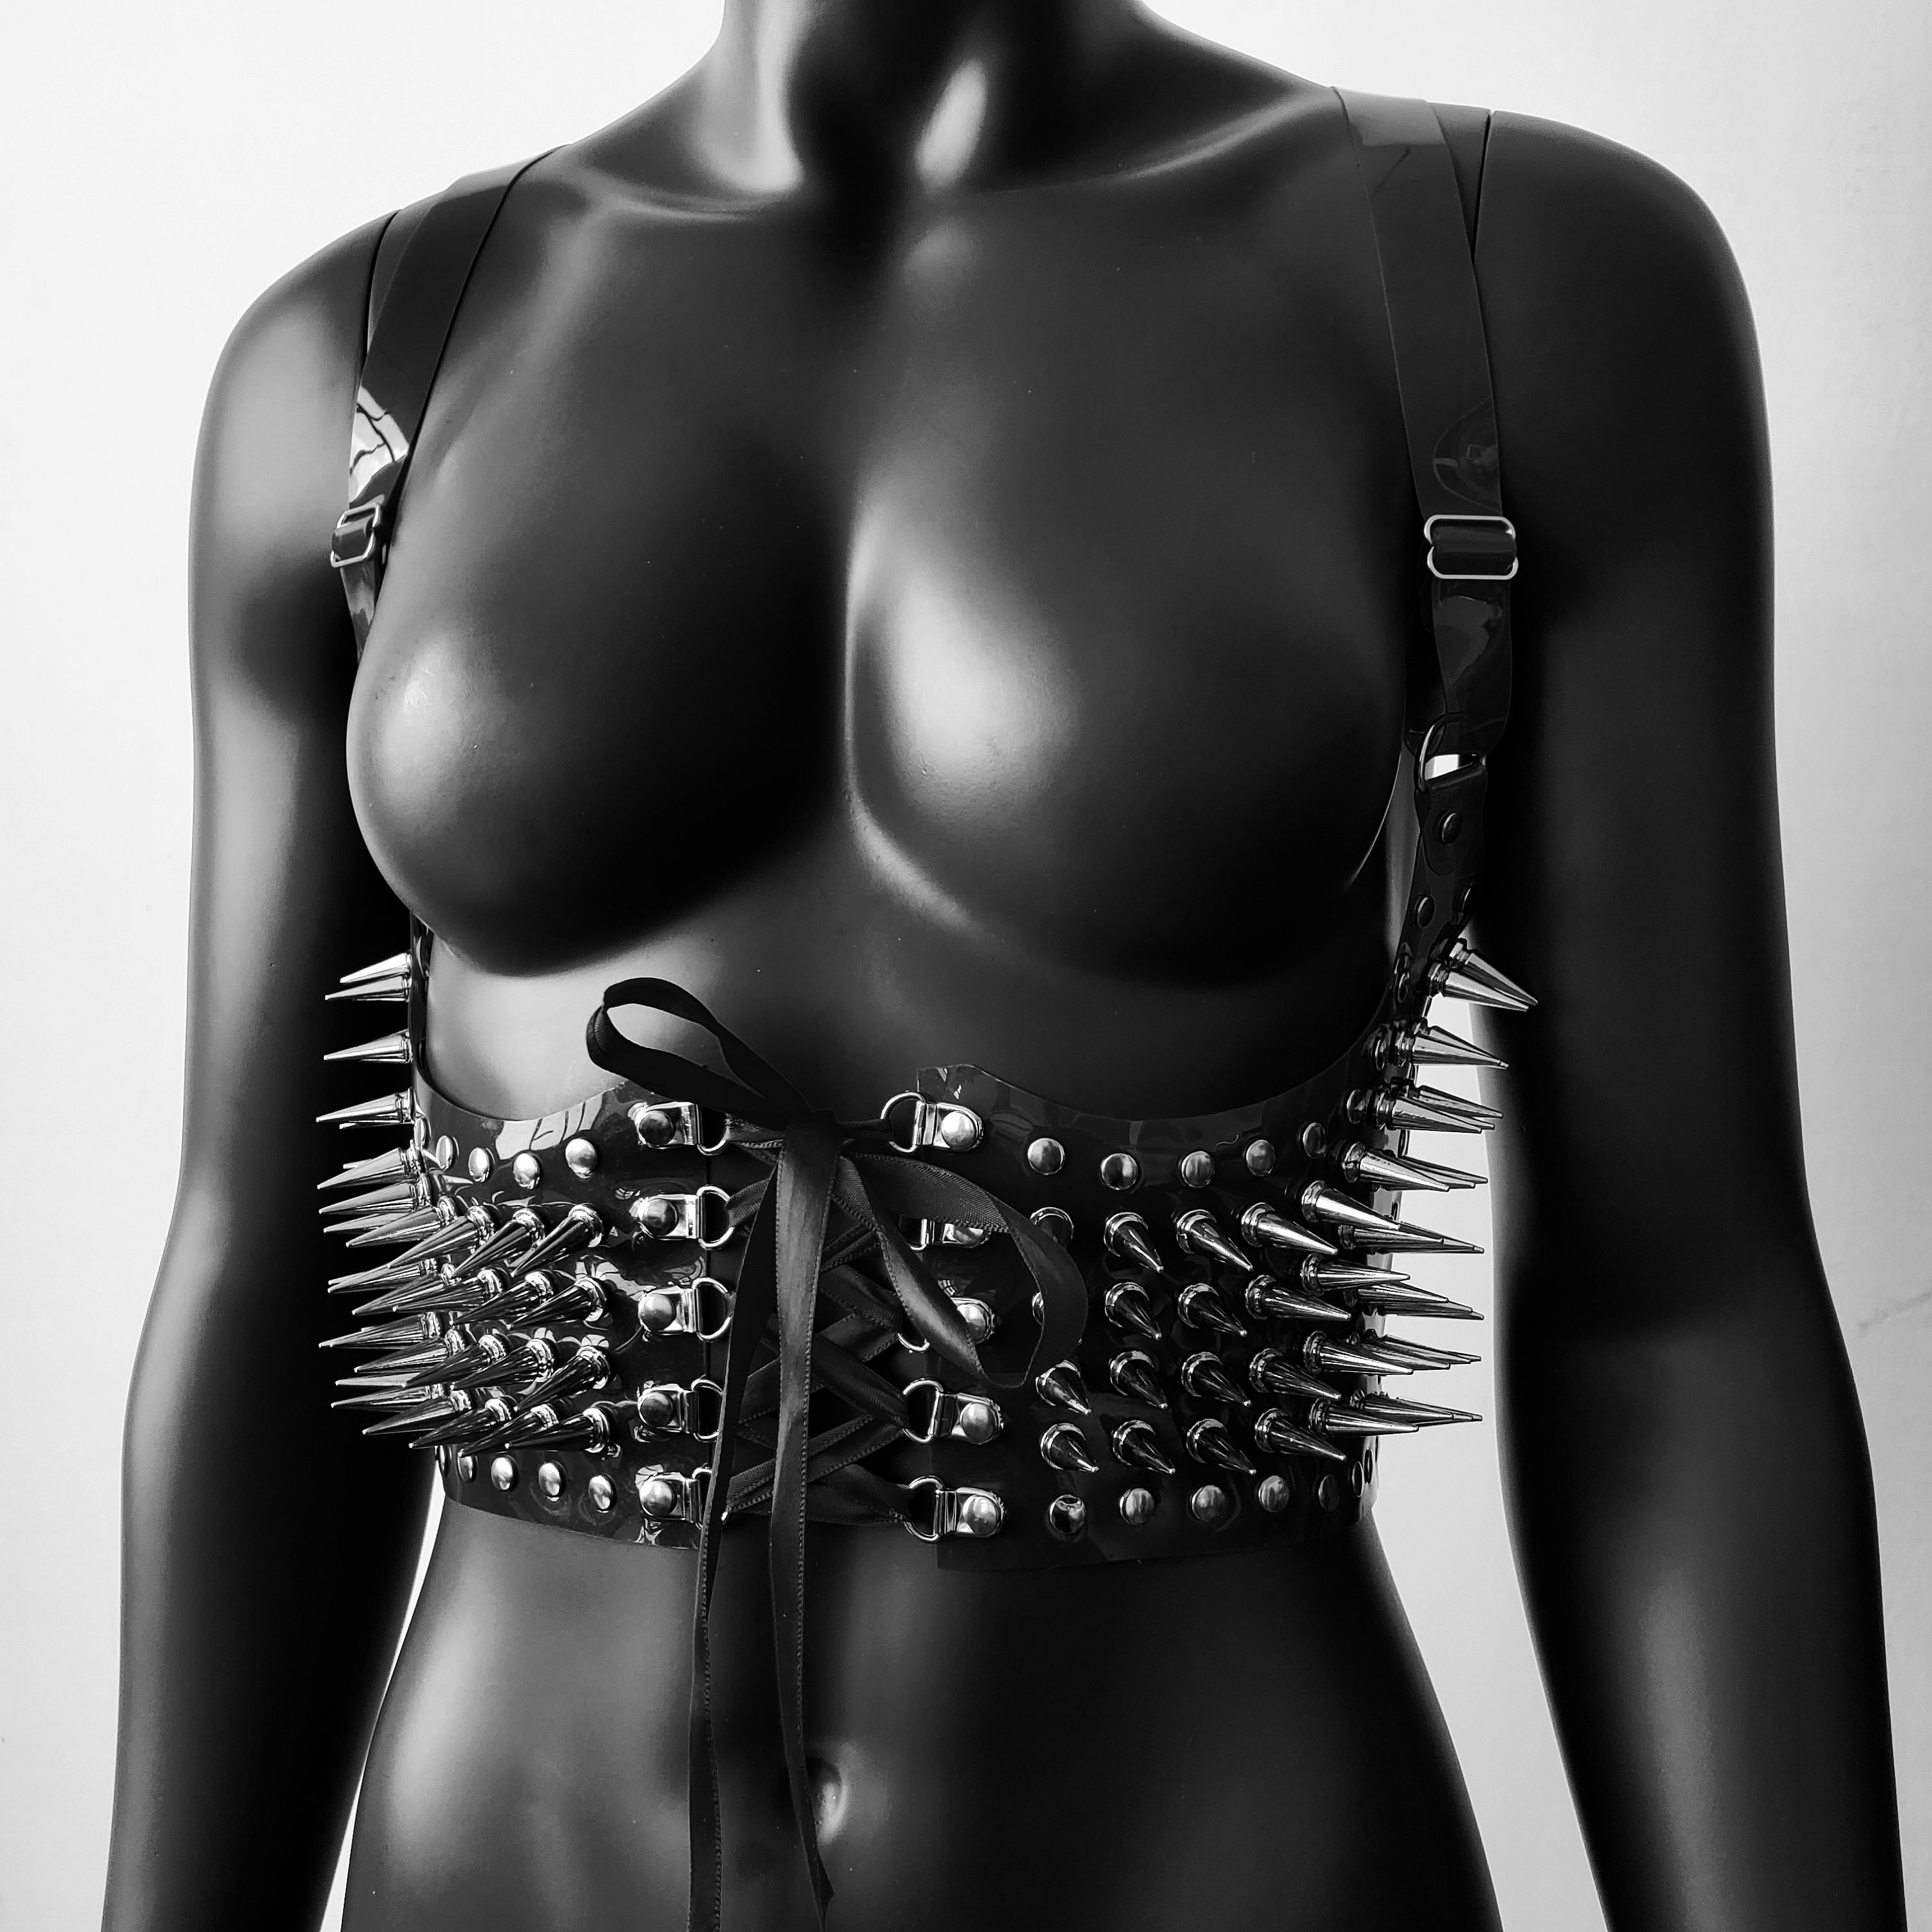 Spiked Bras